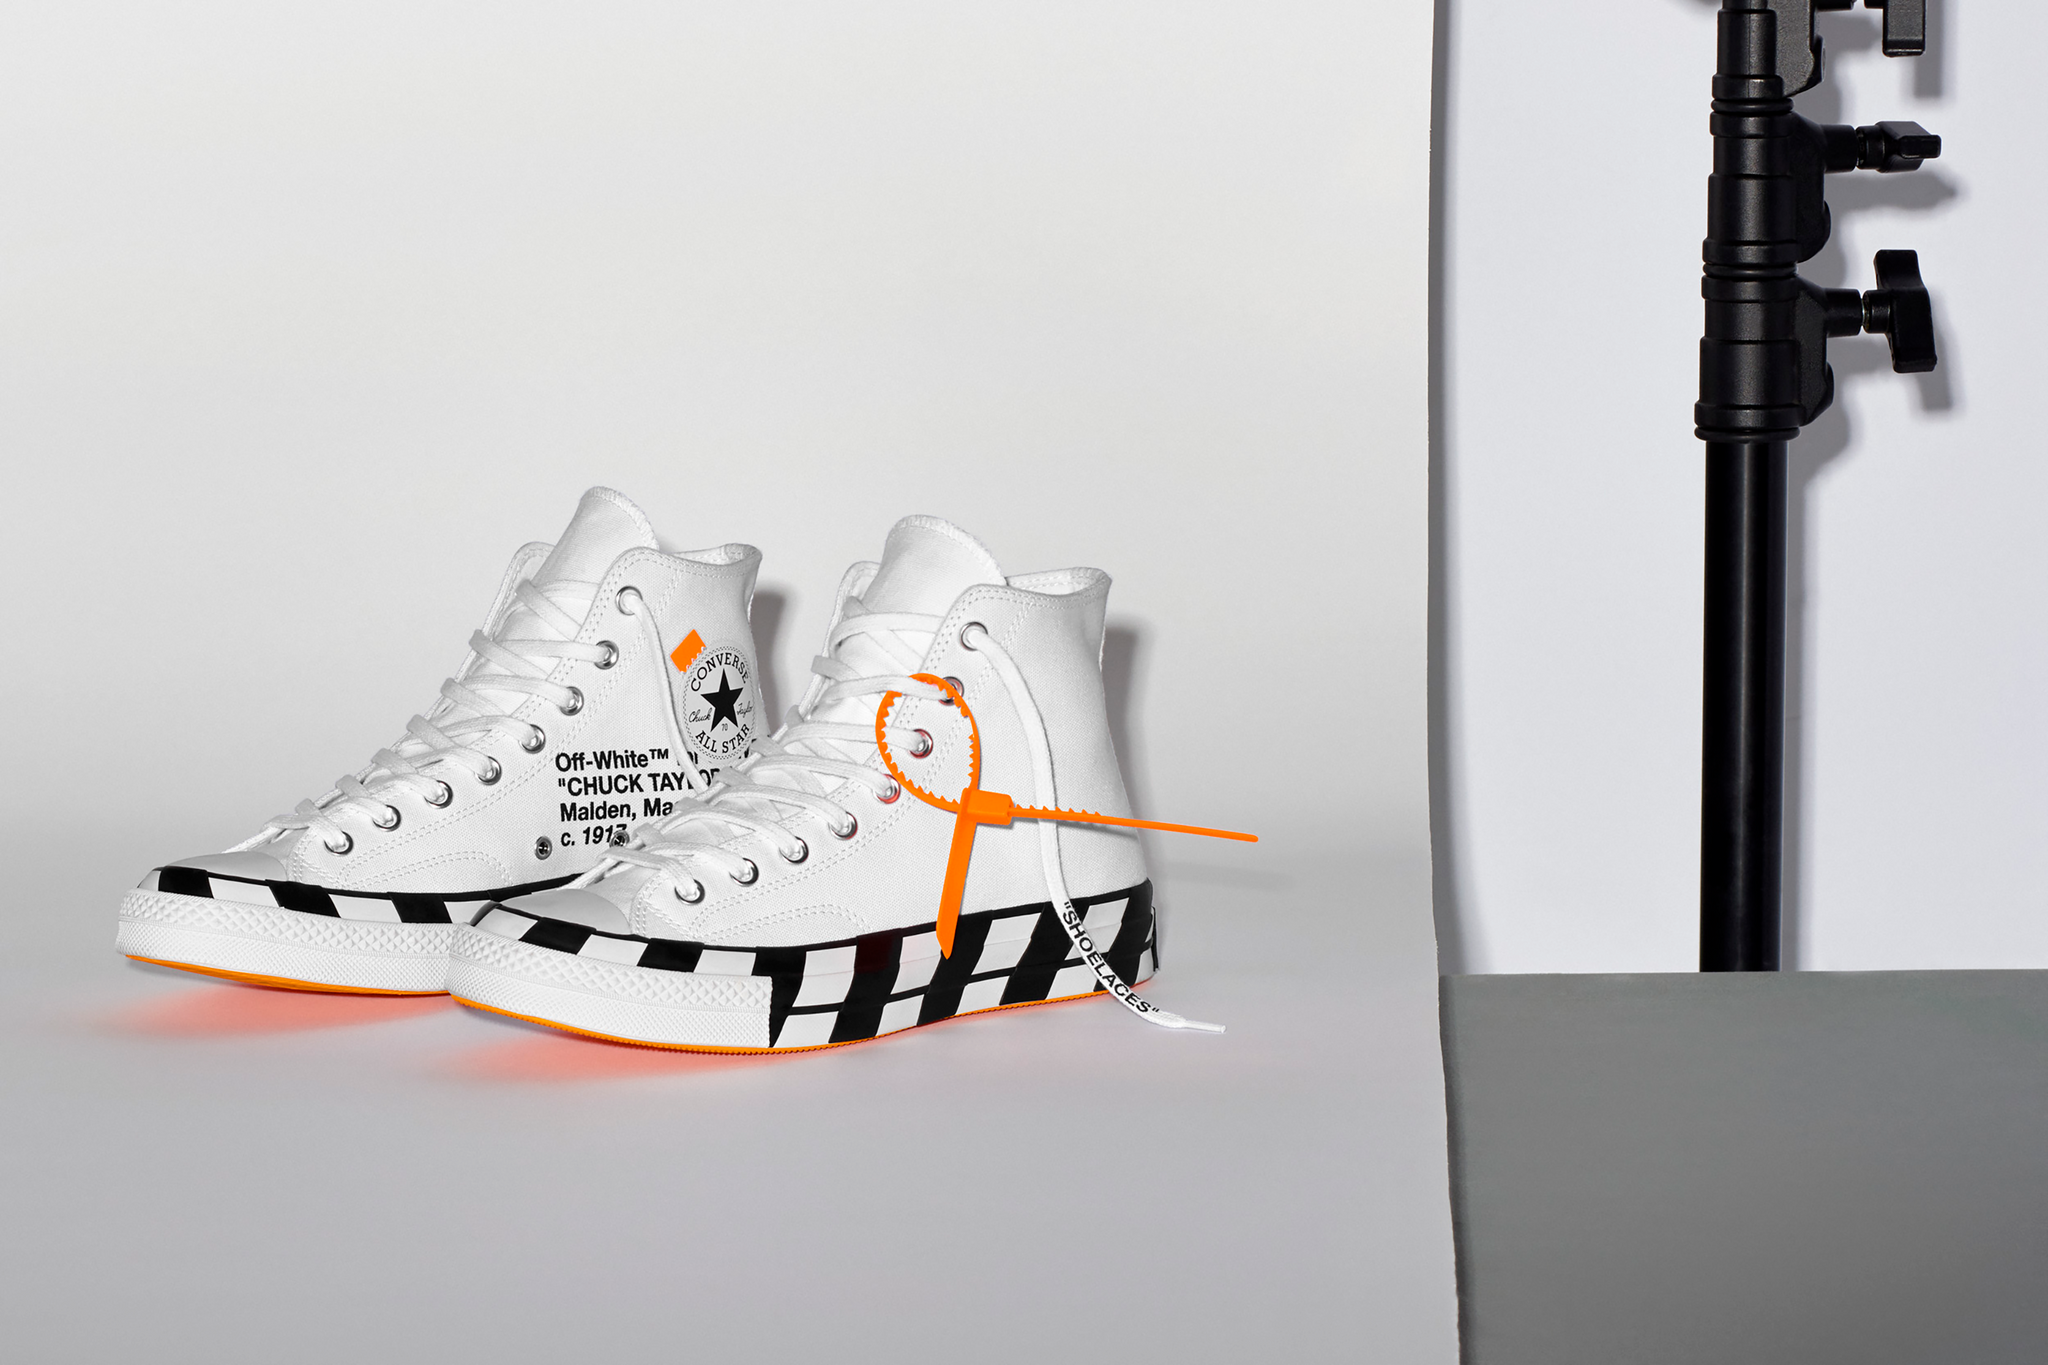 Virgil Abloh's final Nike shoe collaboration is releasing as a Converse  model